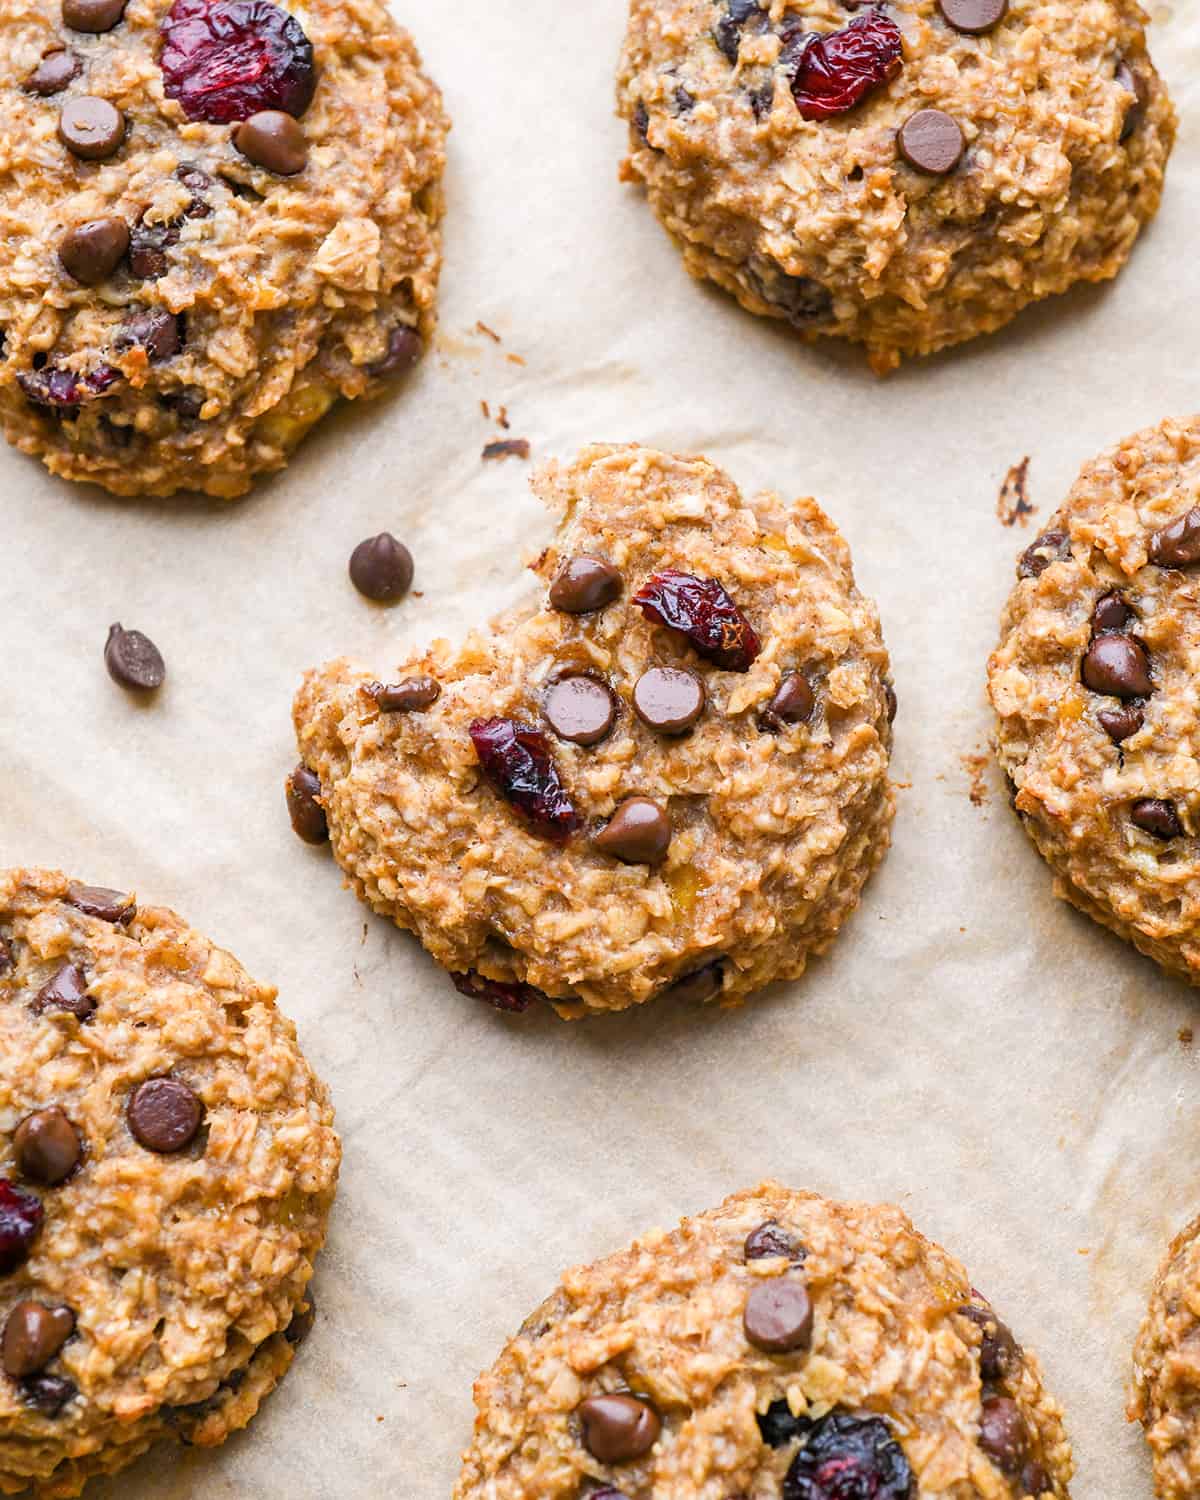 6 Breakfast Cookies with chocolate chips and dried cranberries, one with a bite taken out of it